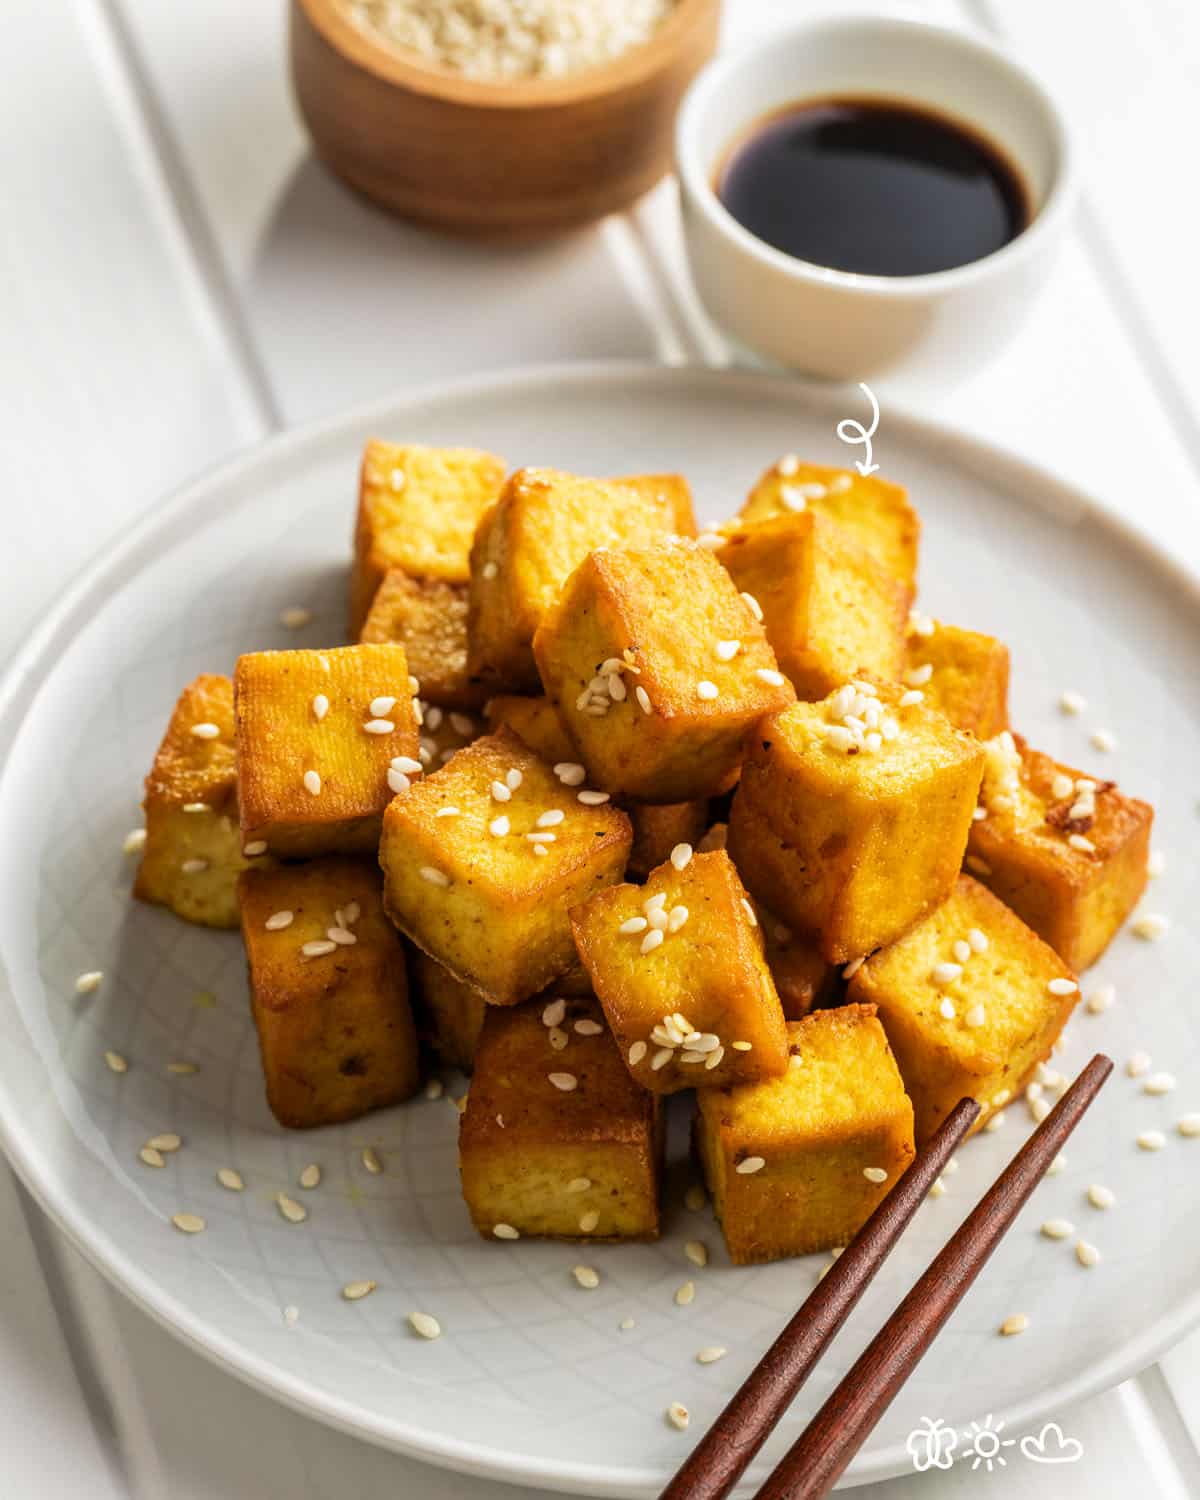 This tofu is easy to reheat due to its ability to maintain its shape when heated for a long time. The best way to reheat firm block tofu is in a pan on the stove.